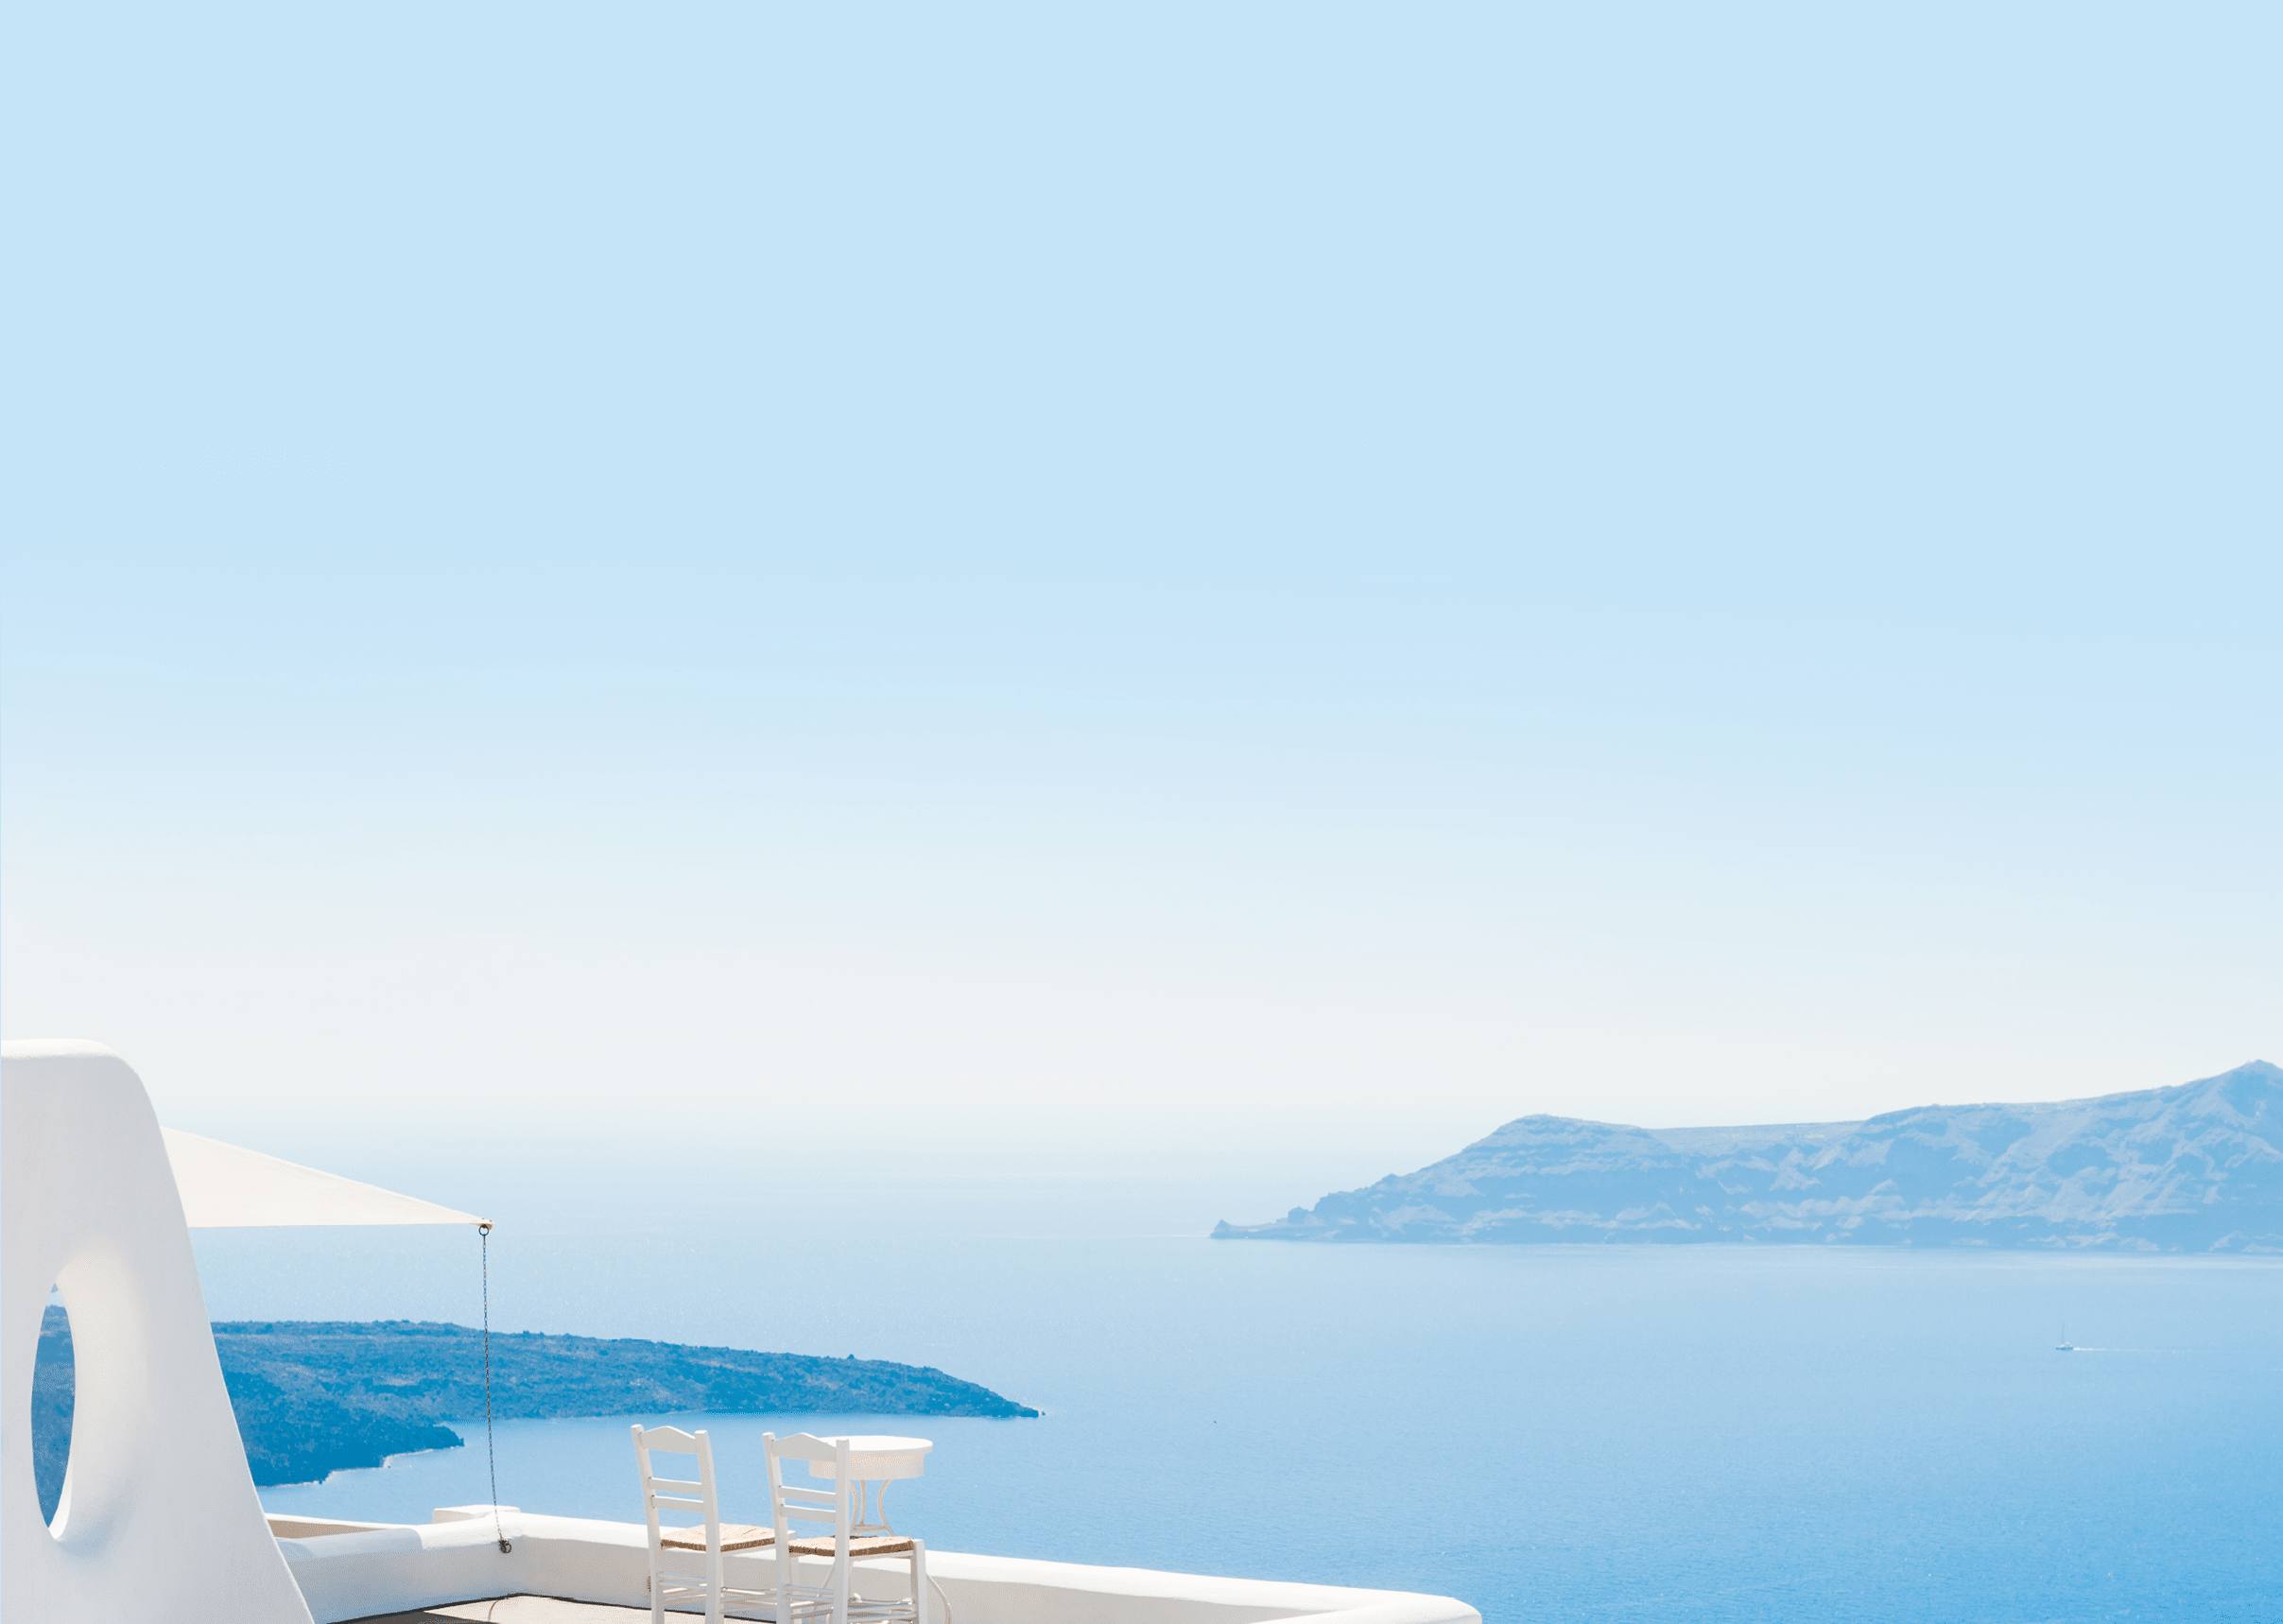 Two chairs on the terrace with sea views  Santorini island, Greece  Travel and vacation background